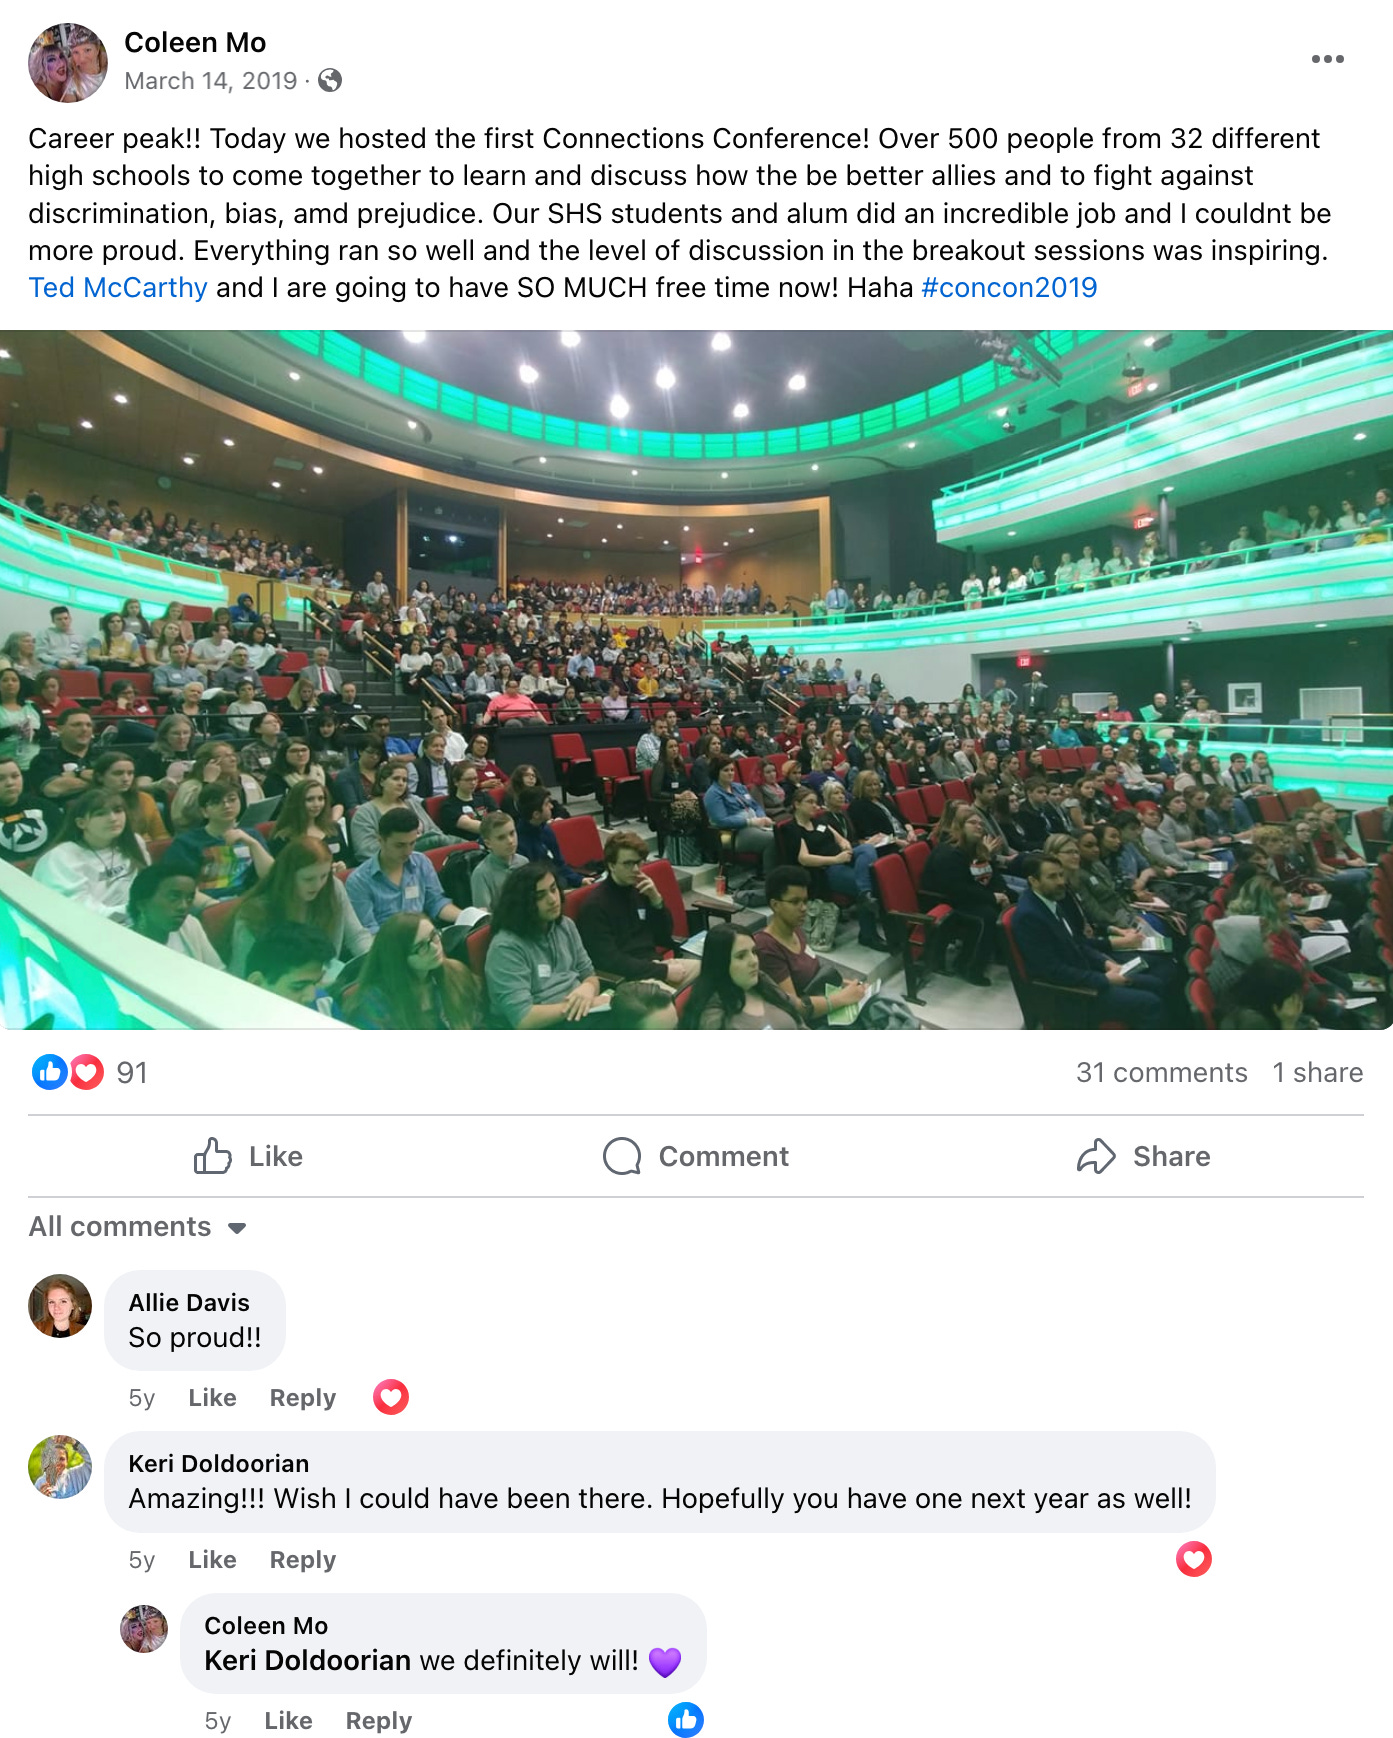 Facebook Post of the ConCon 2019 